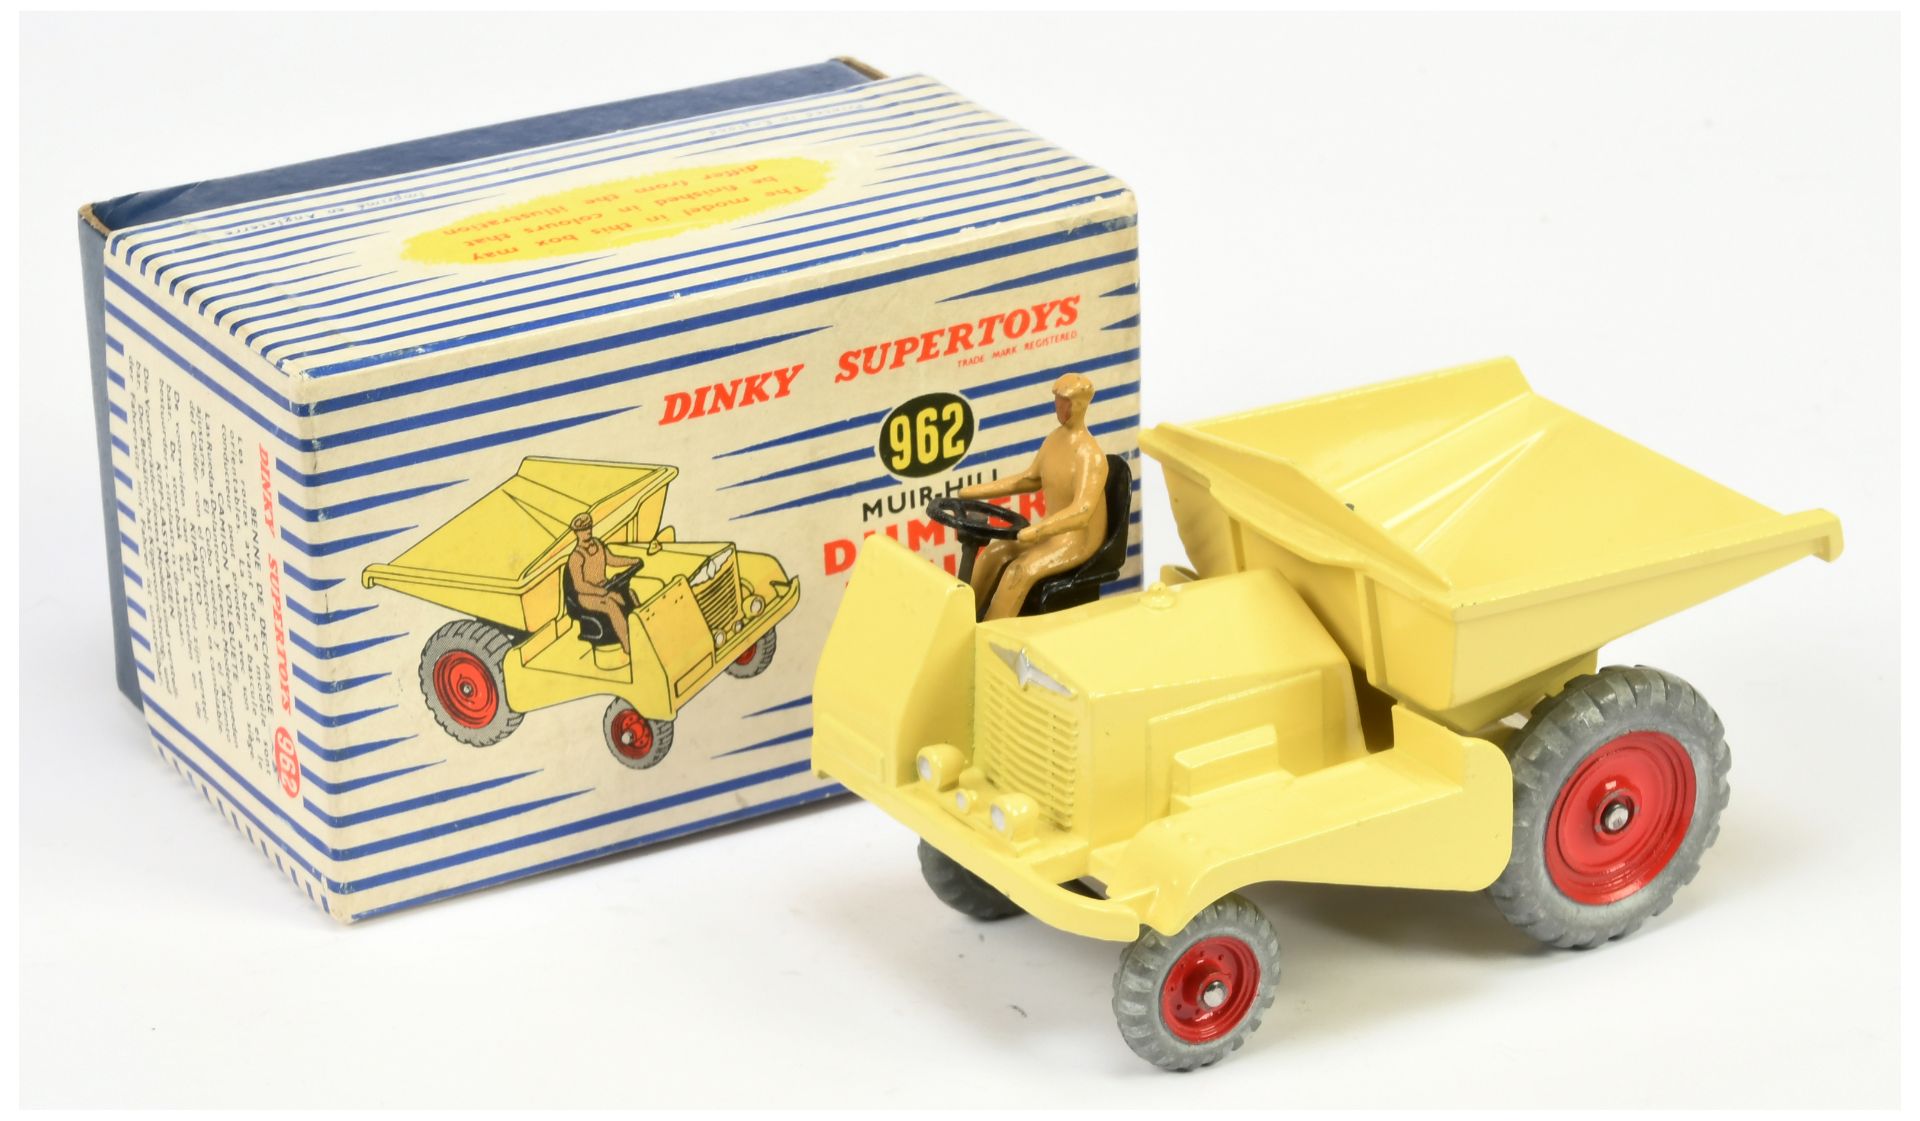 Dinky Toys 962 Muir-Hill Dumper Truck - Yellow body and tipper, red metal wheels, tan figure driv...